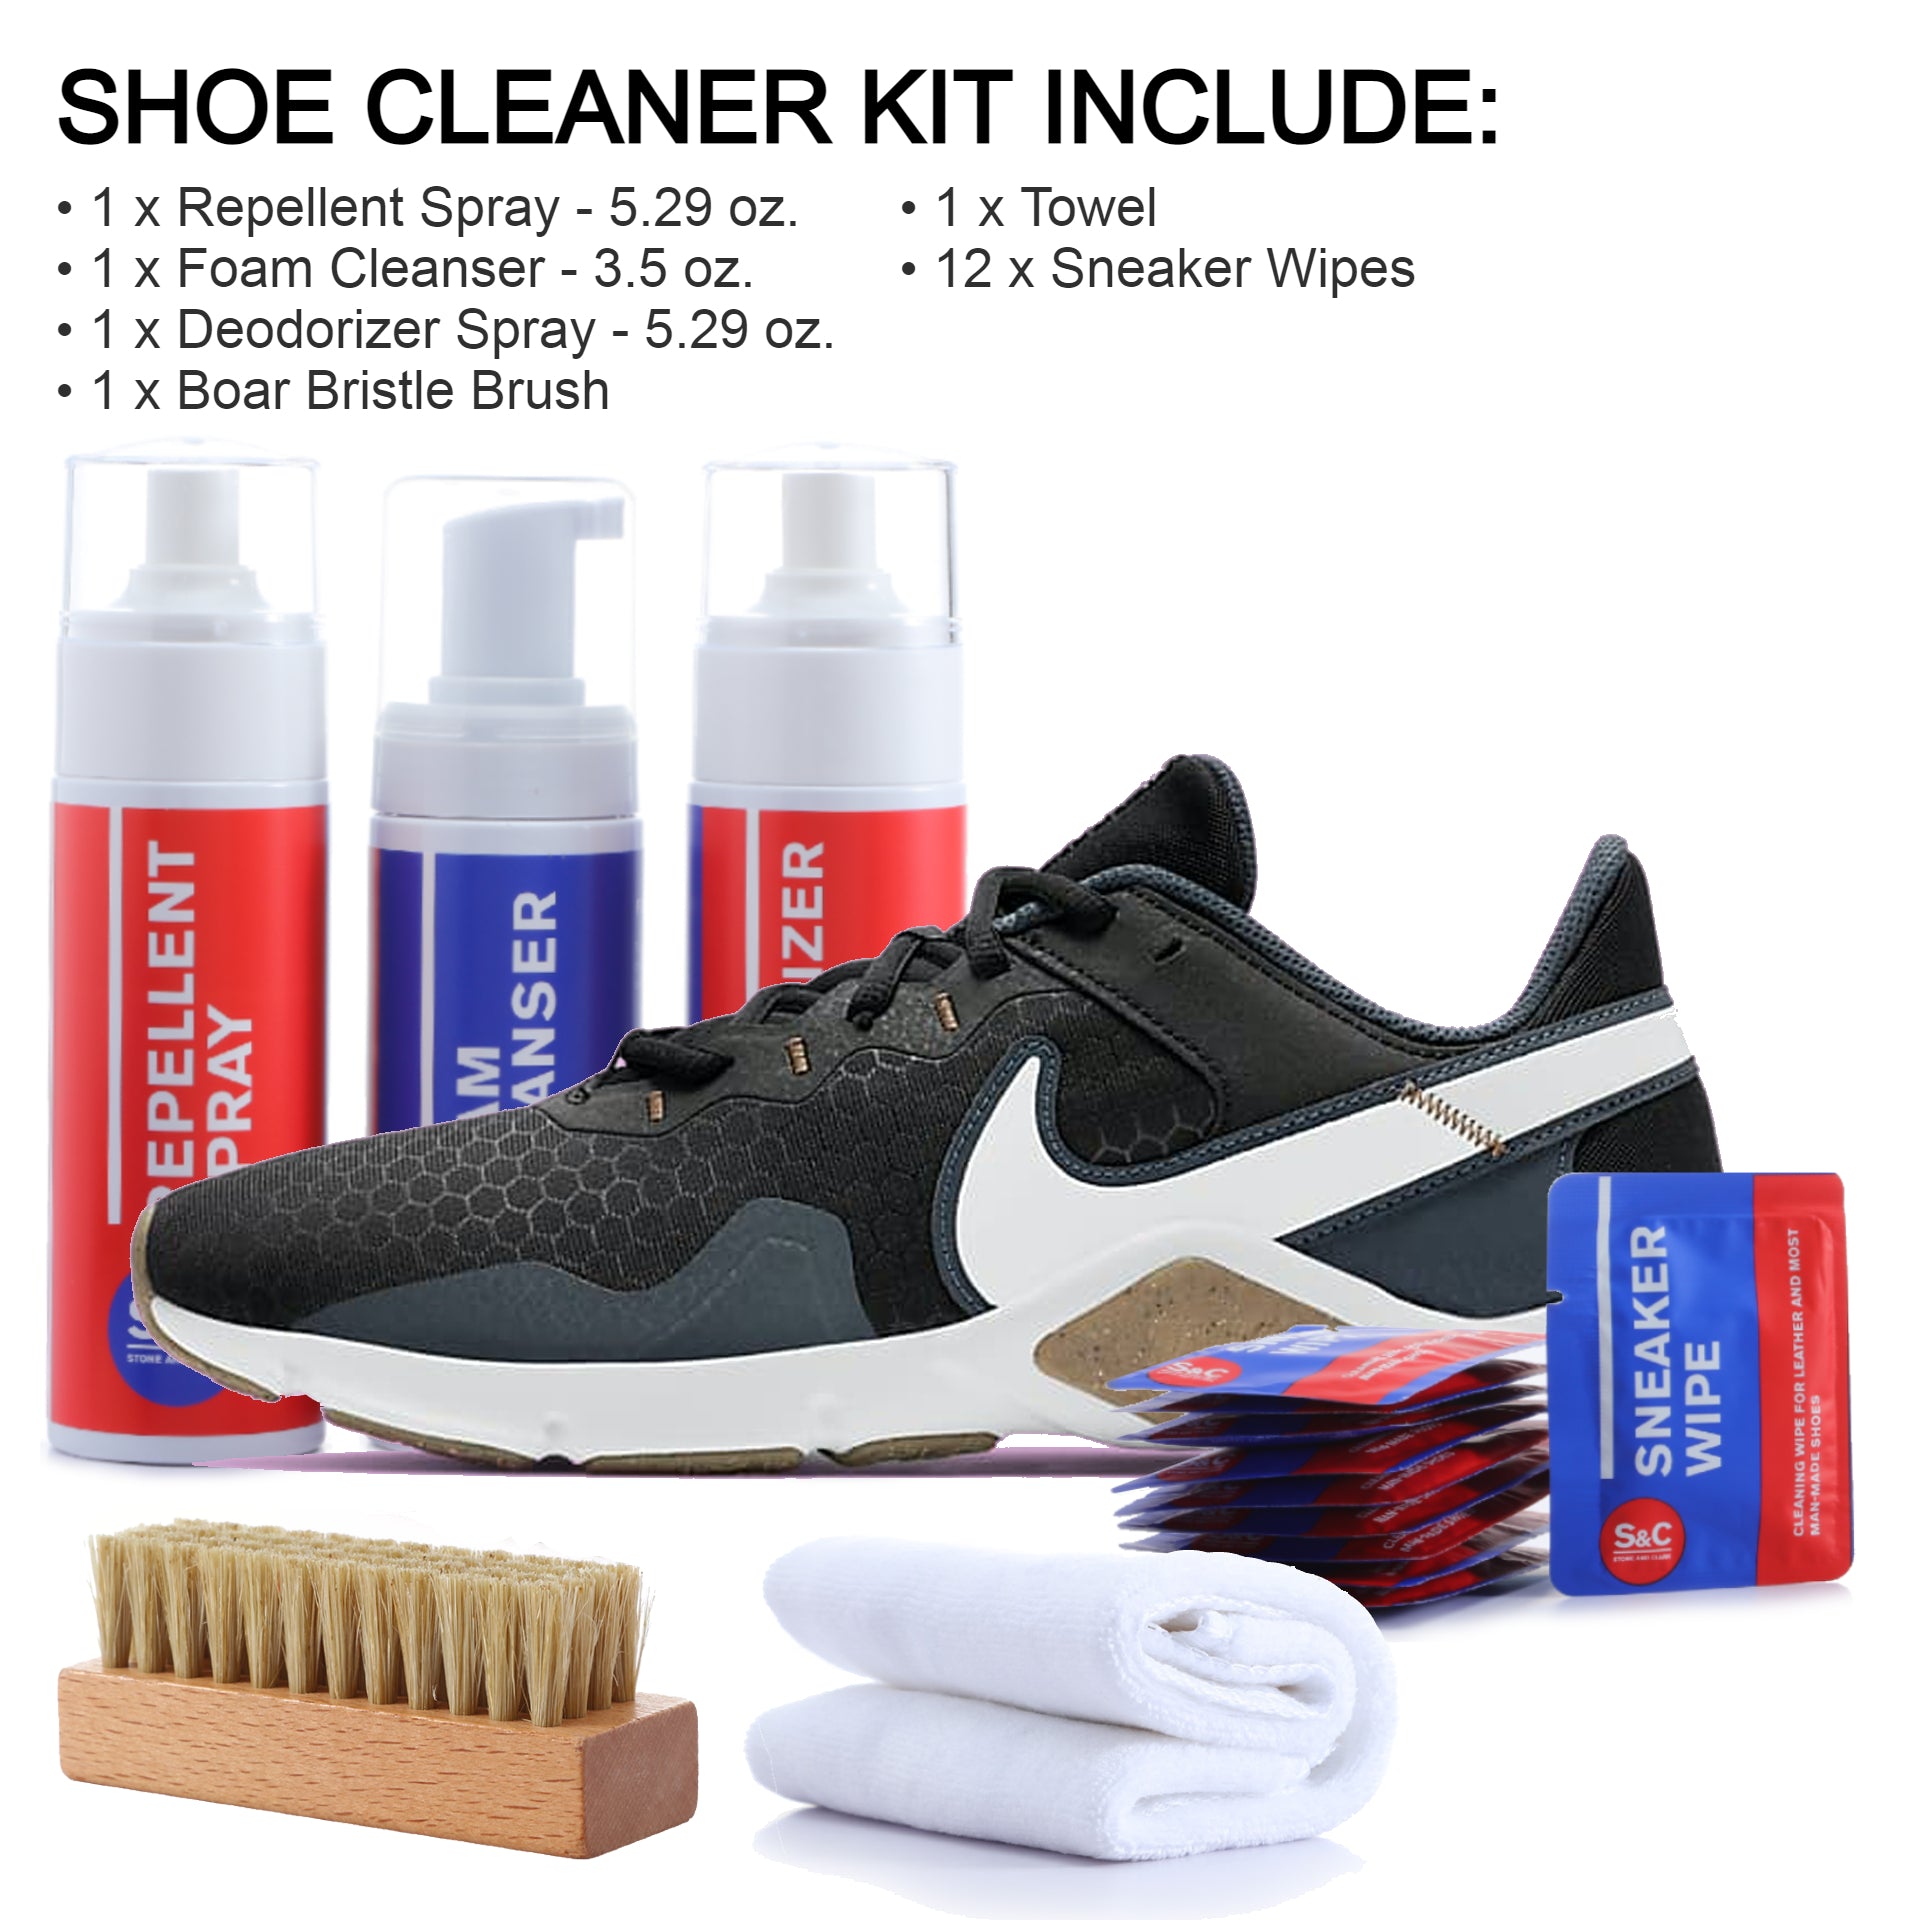 100ml Shoe Cleaner Foam Cleaner with Brush Cleaning Stain Dirt